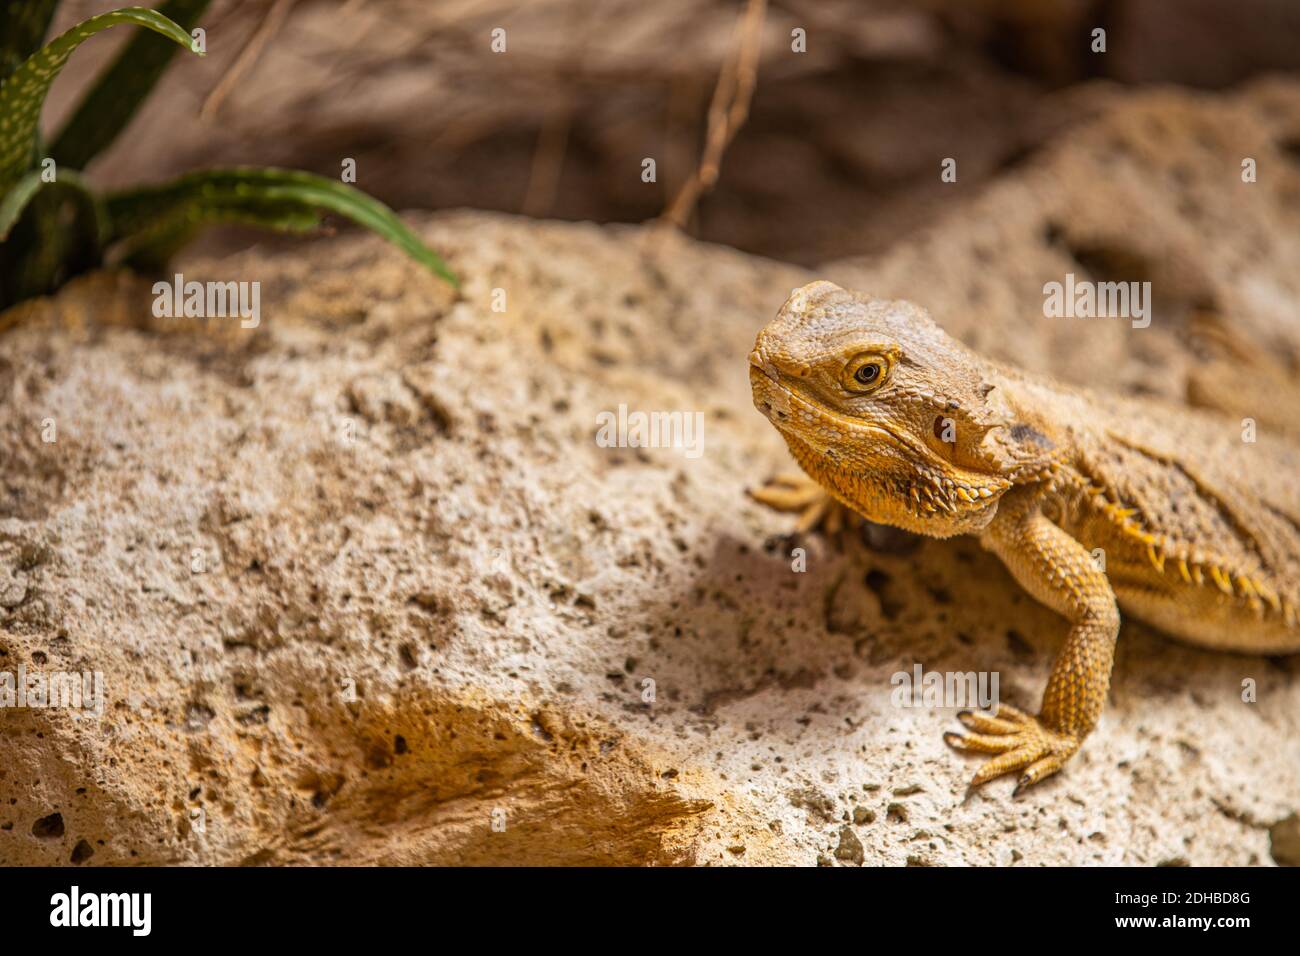 Agama Dragon Lizard. Indian garden lizard (Calotes versicolor) on rocks with natural sunlight, reptile hunting for insects. Animal wildlife portrait Stock Photo